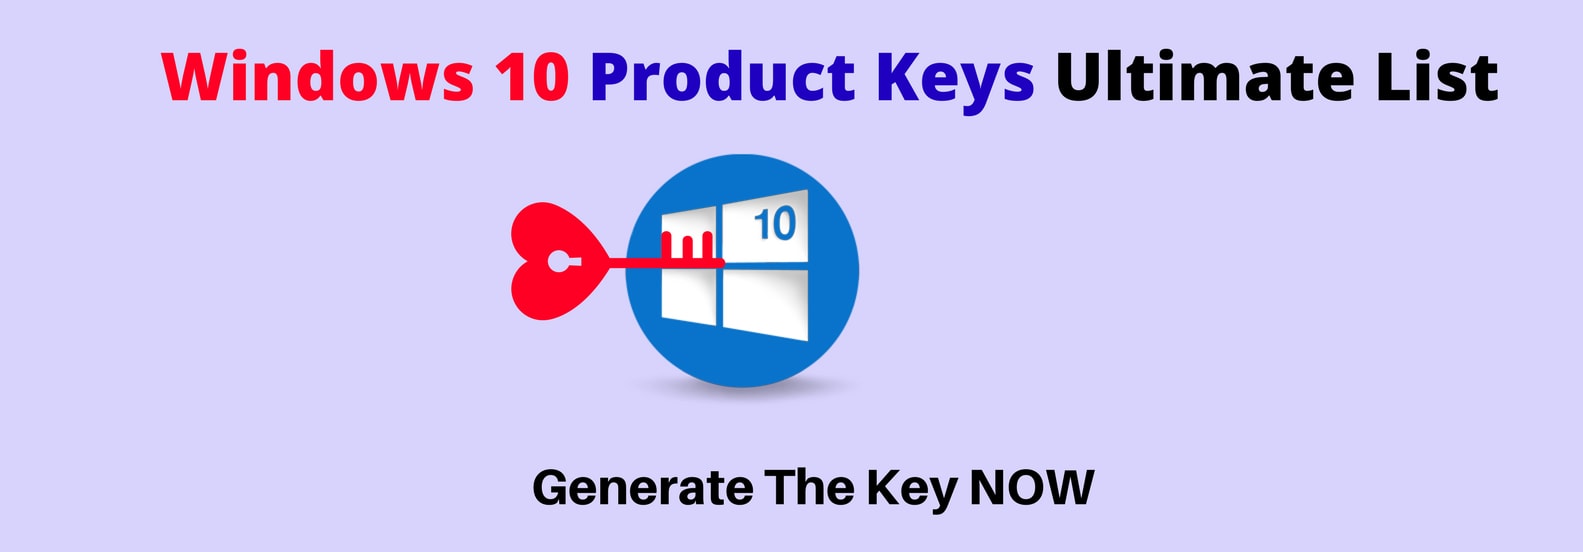 How to Find Windows 10 Pro Product Key in 2017